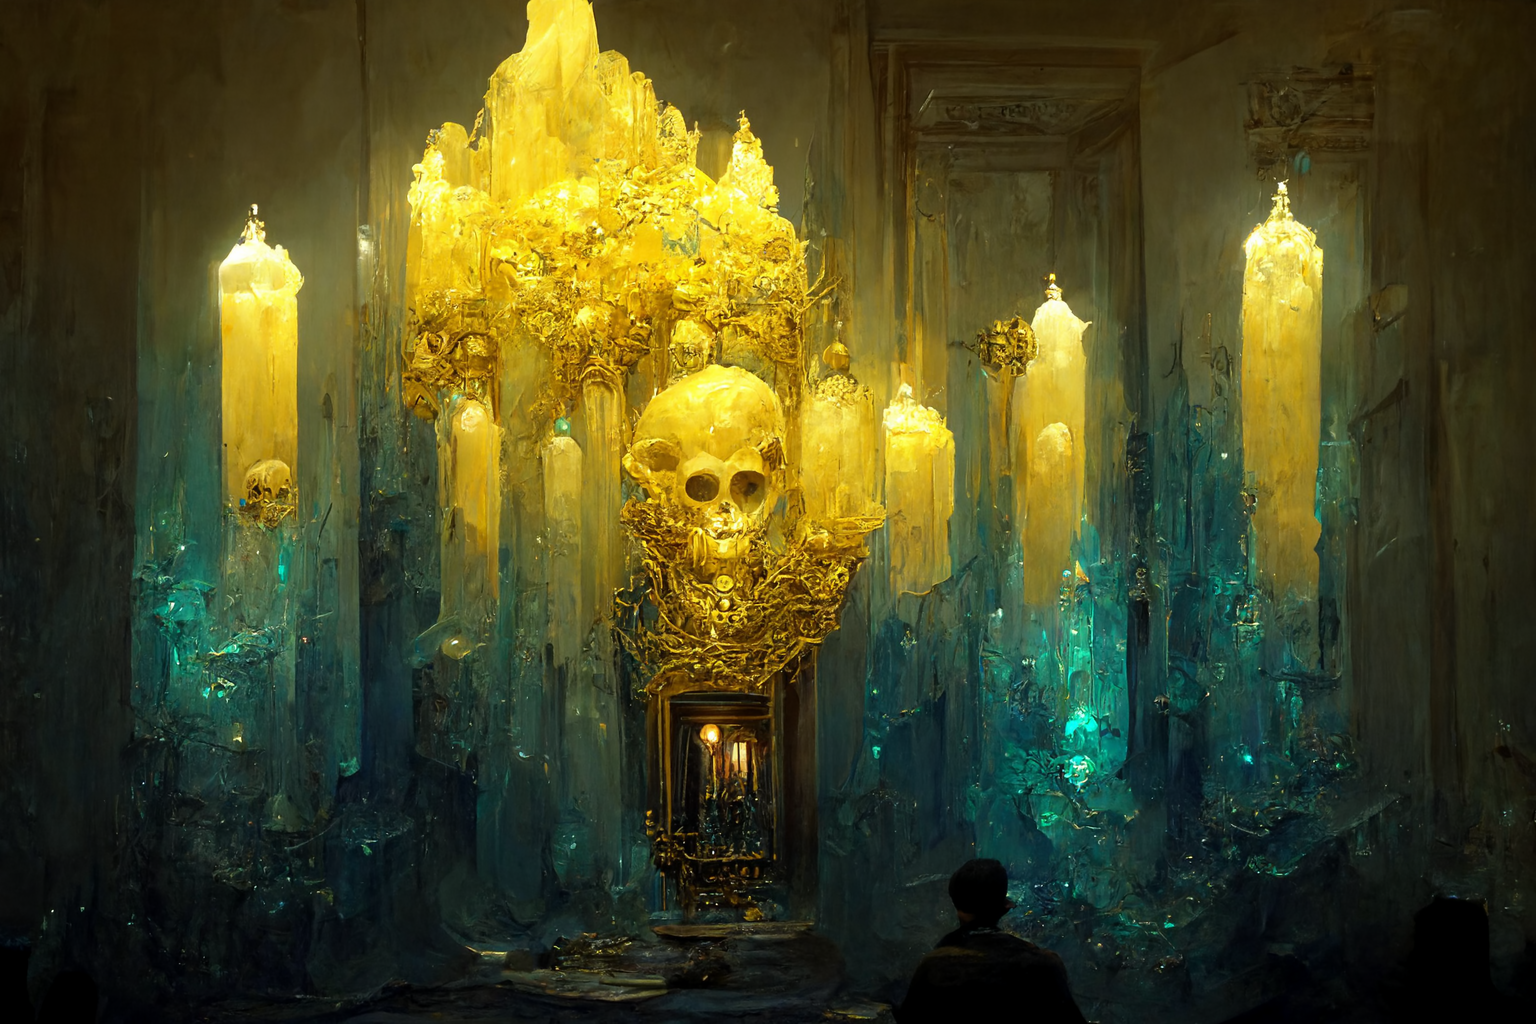 Gilded walls of sung-into-creation bones as imagined by Midjourney.